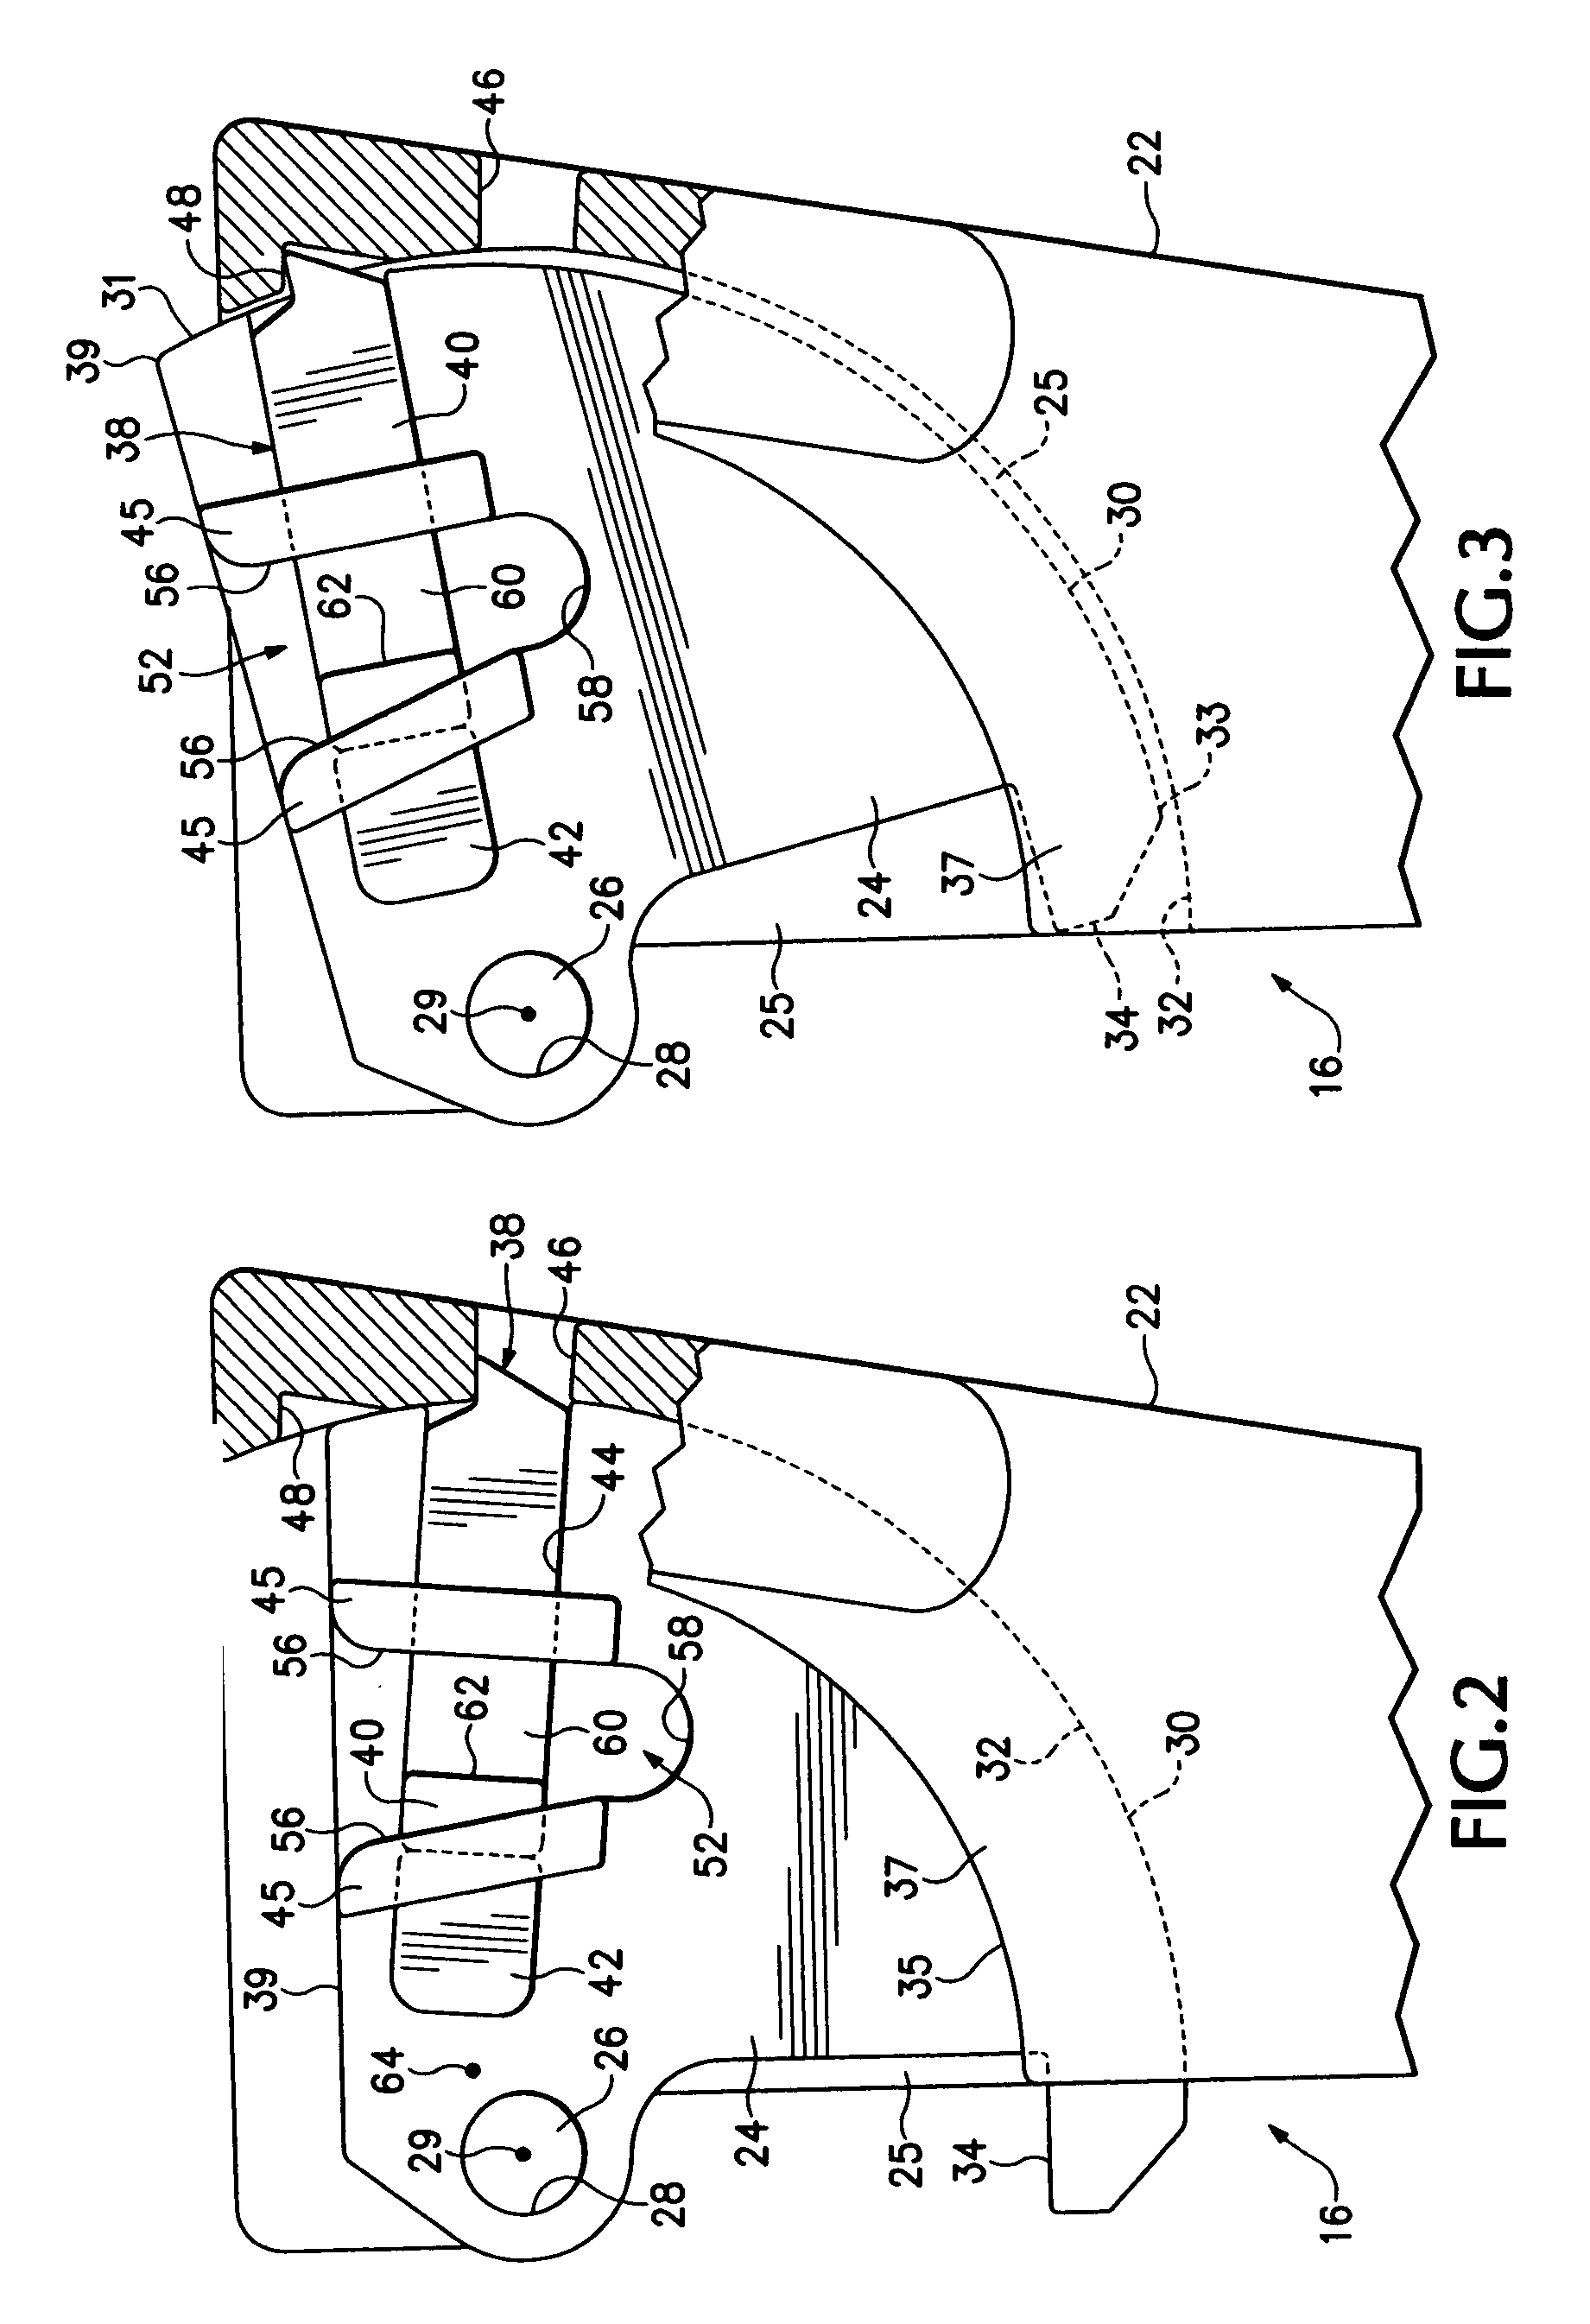 Lock assembly for securing a wear member to earth-working equipment